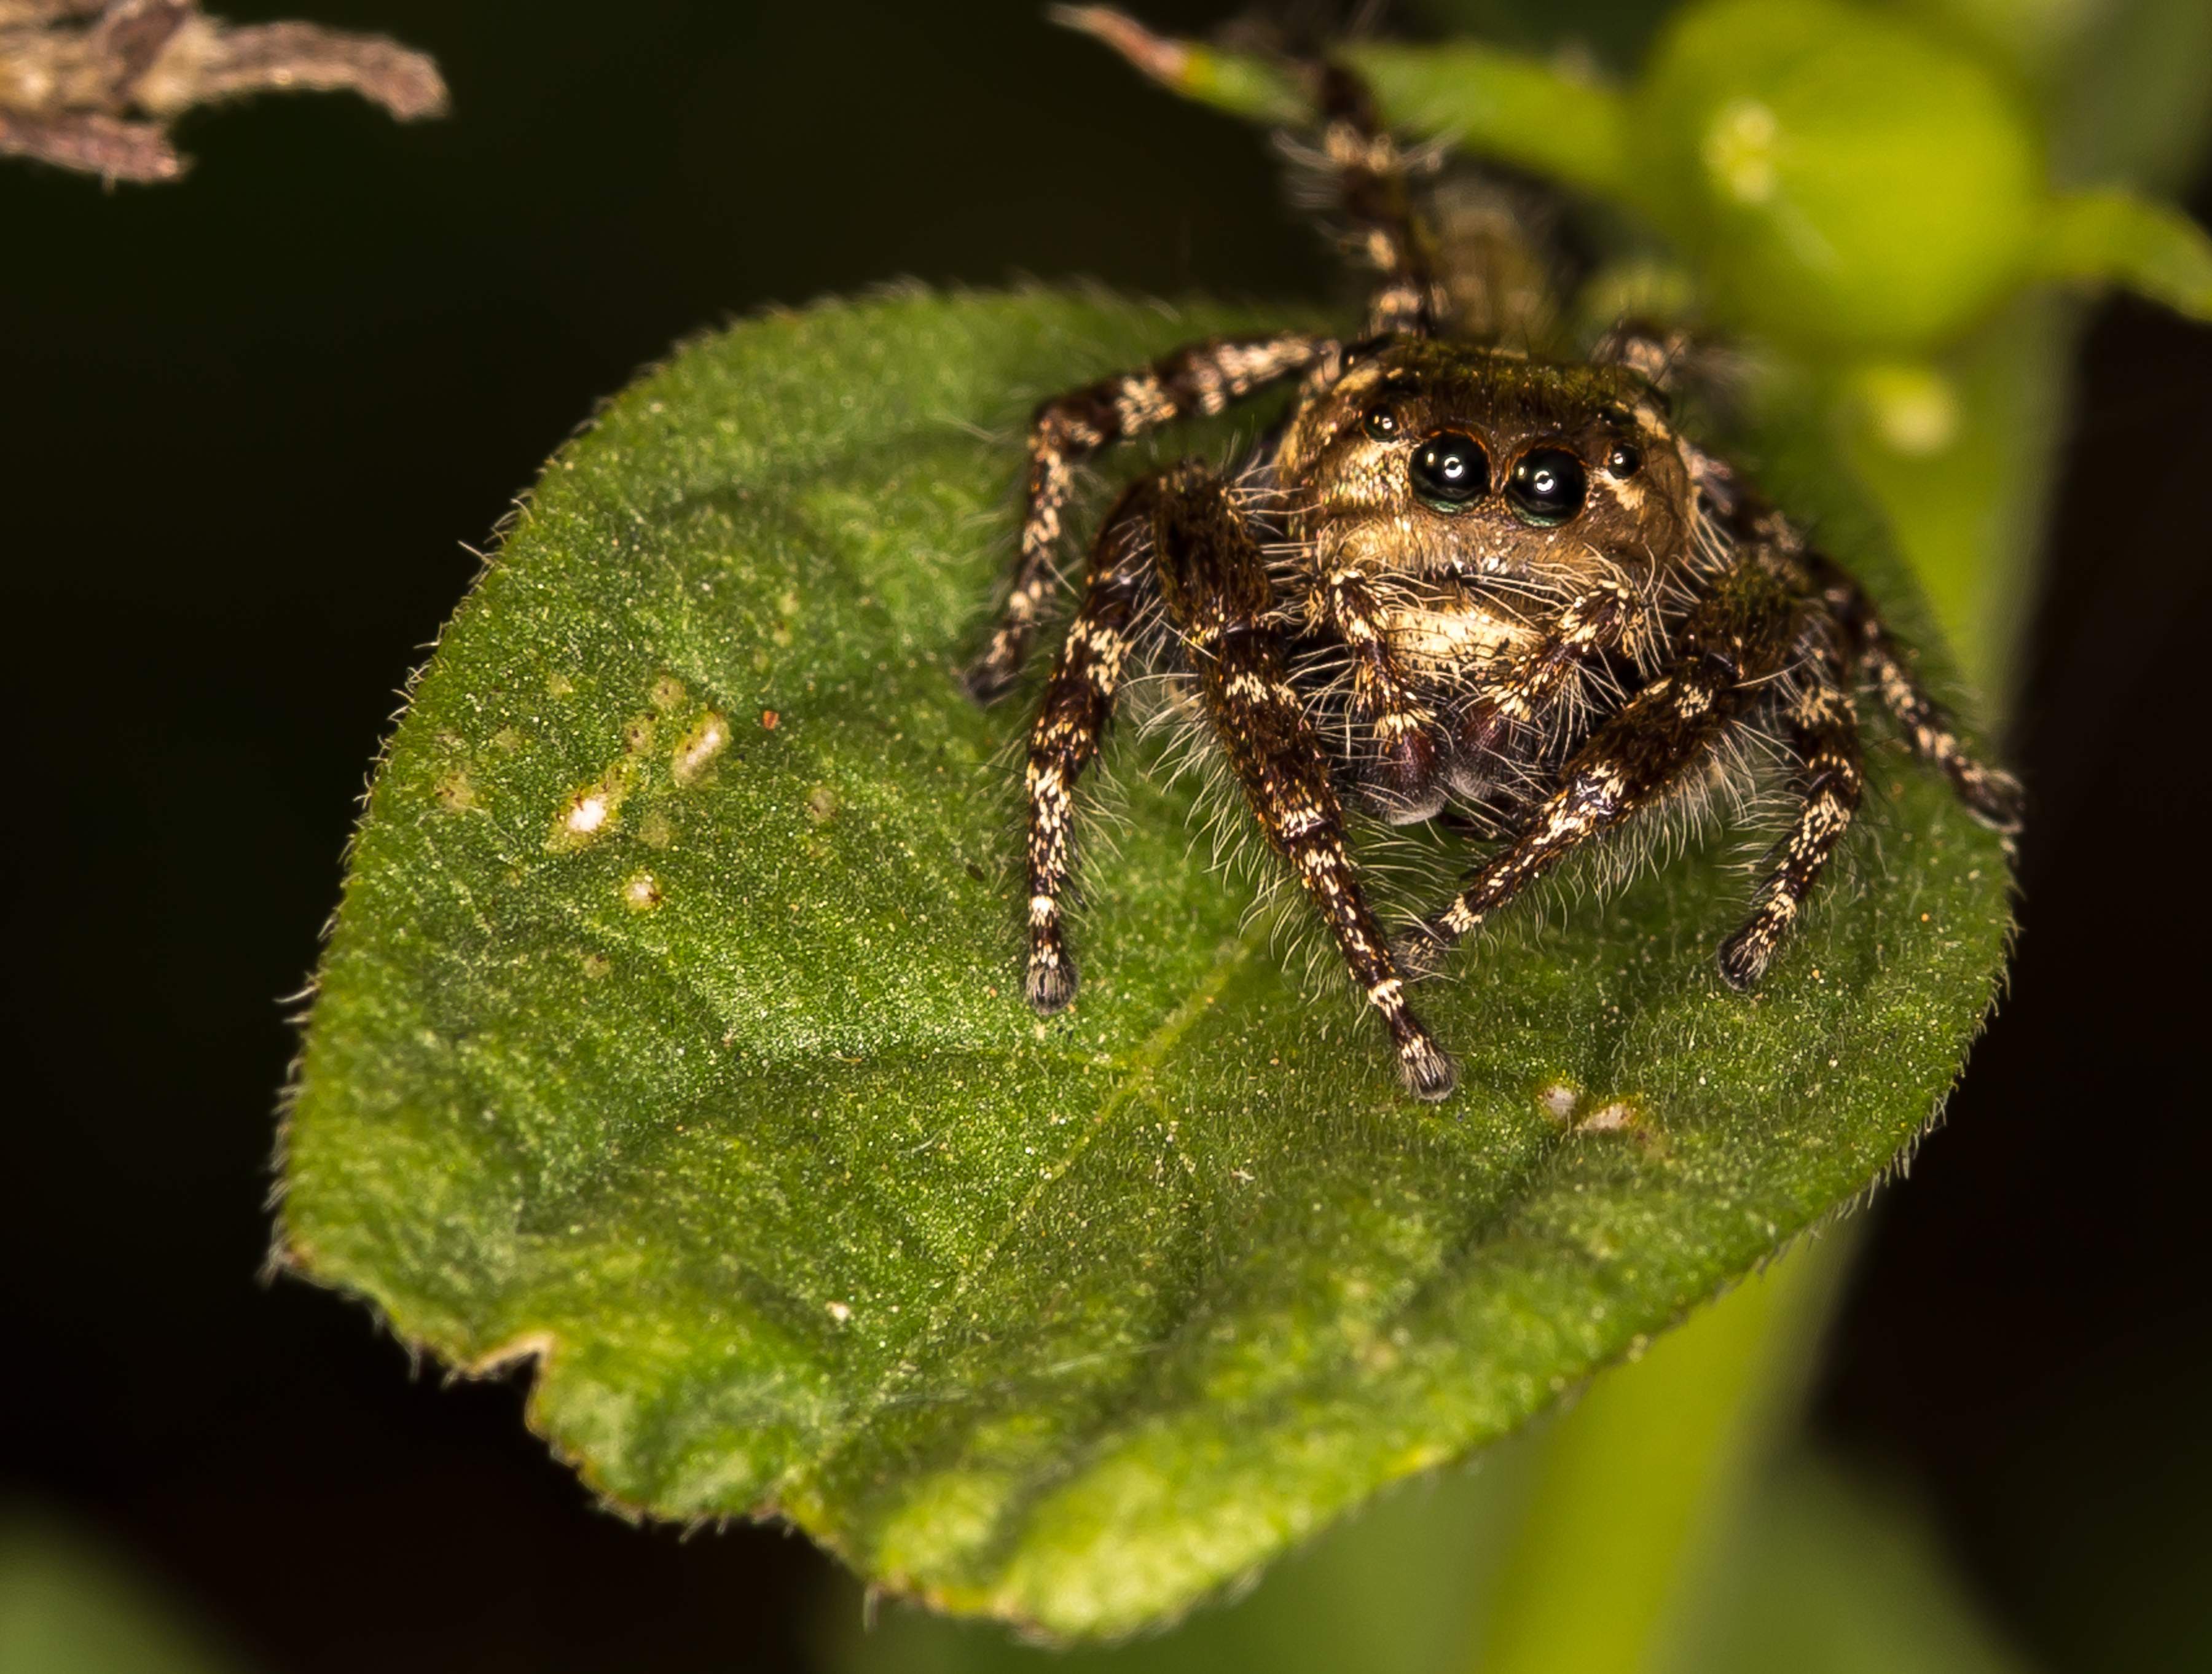 World wild web: A cluster of new species of spiders in India